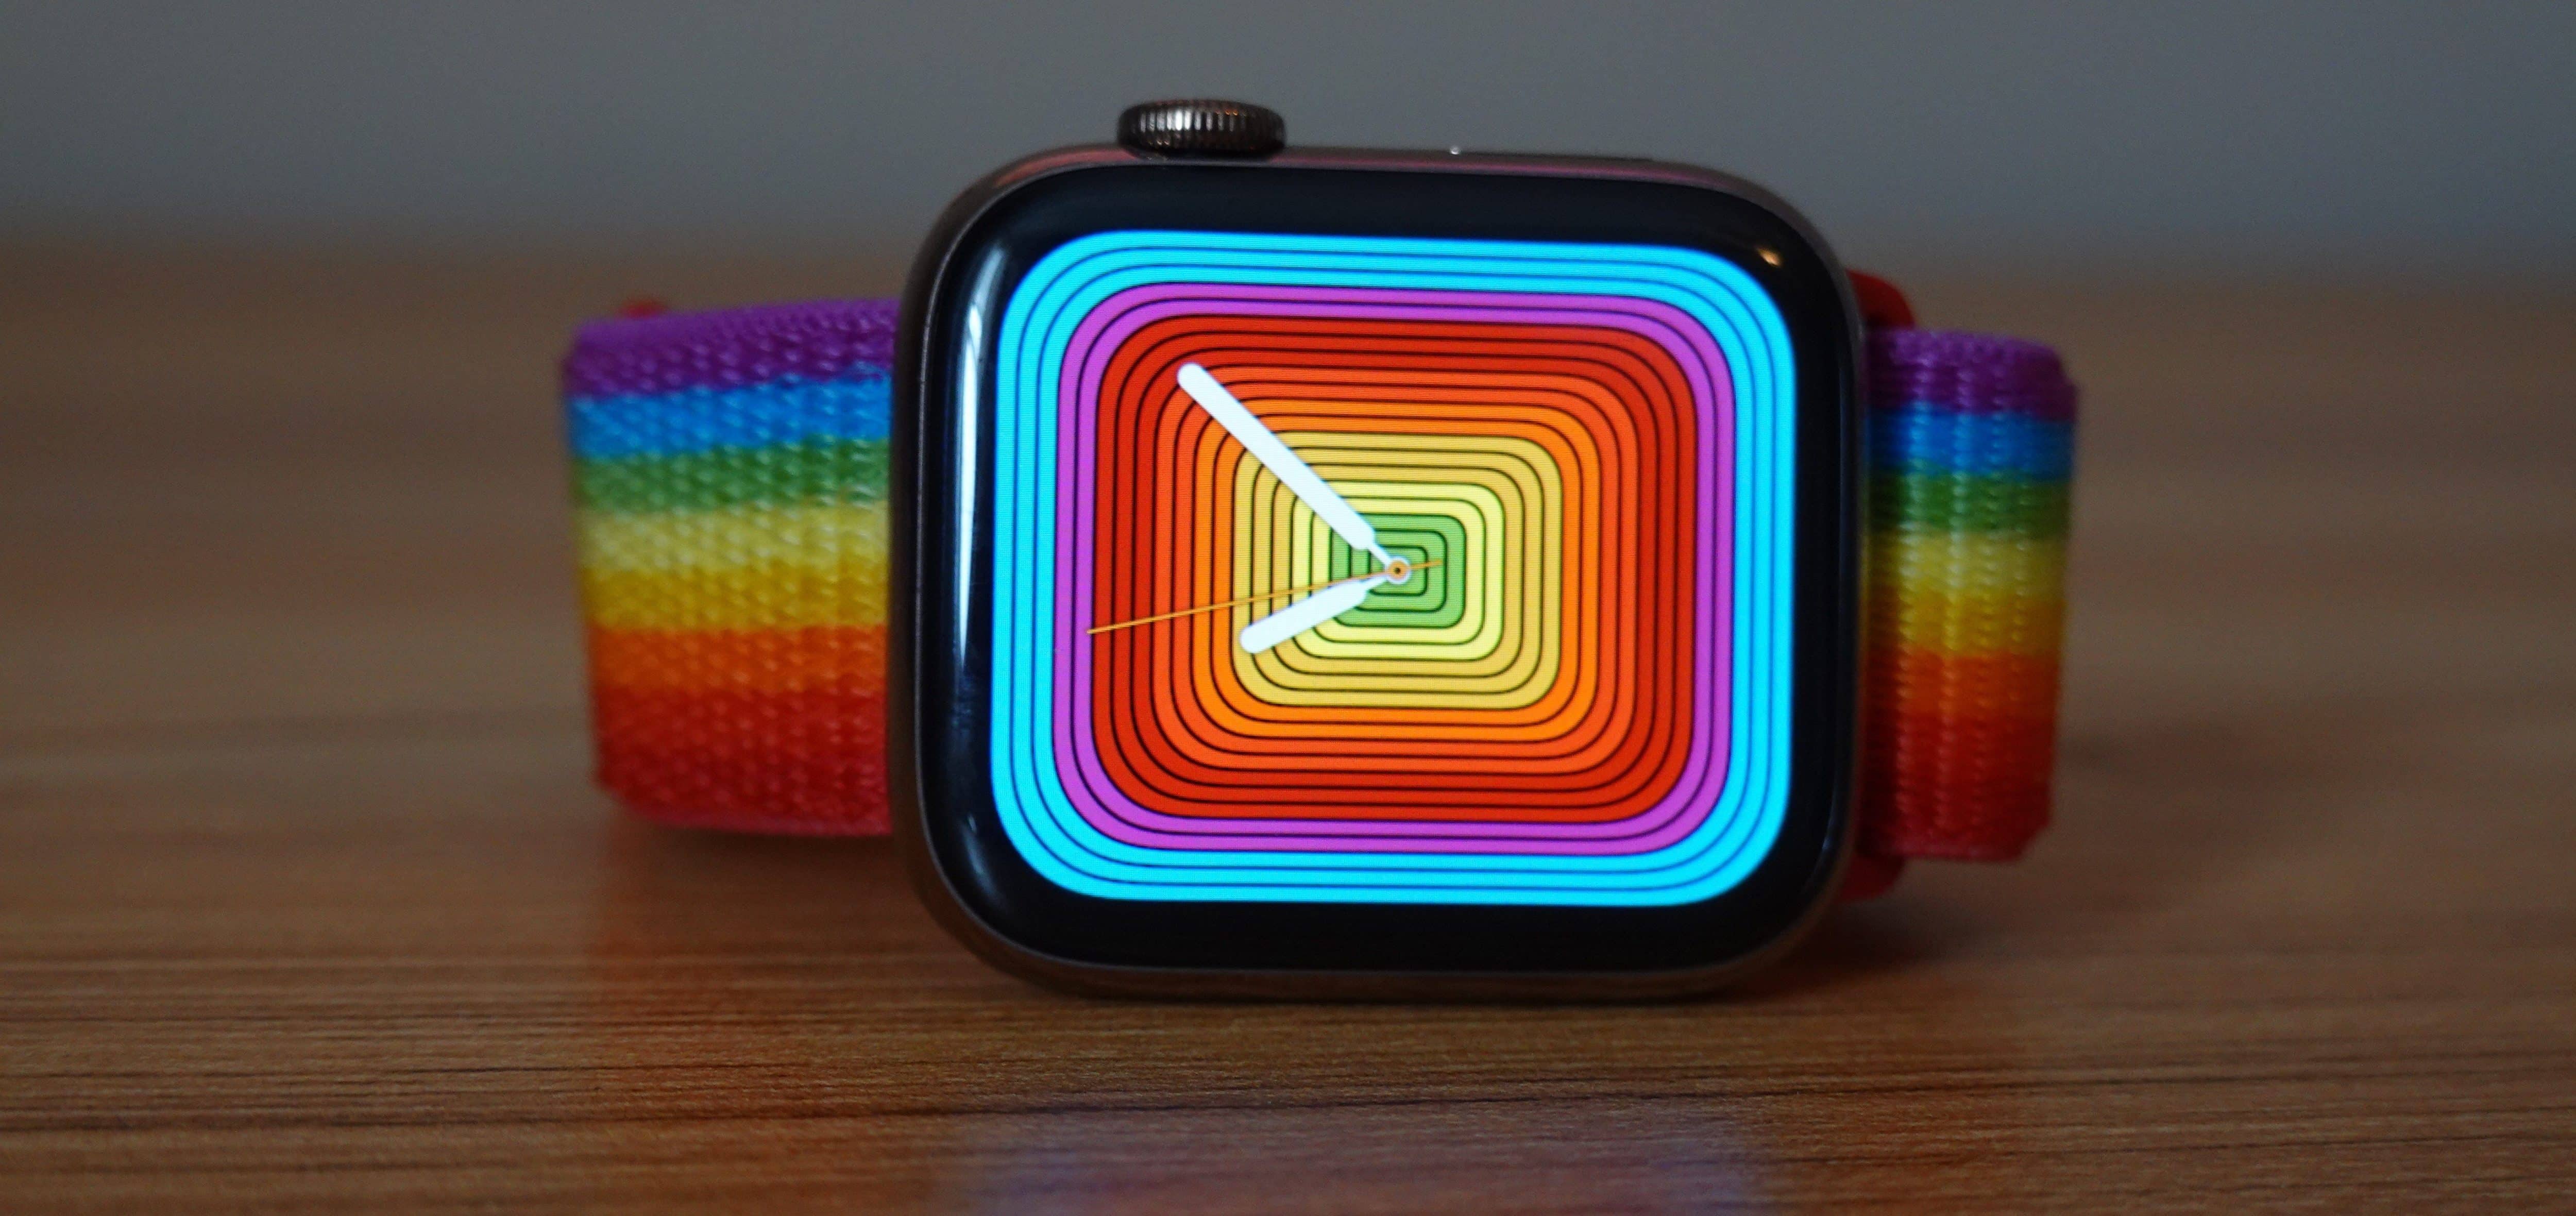 Apple Watch Series 6, OLED, microLED, 2020